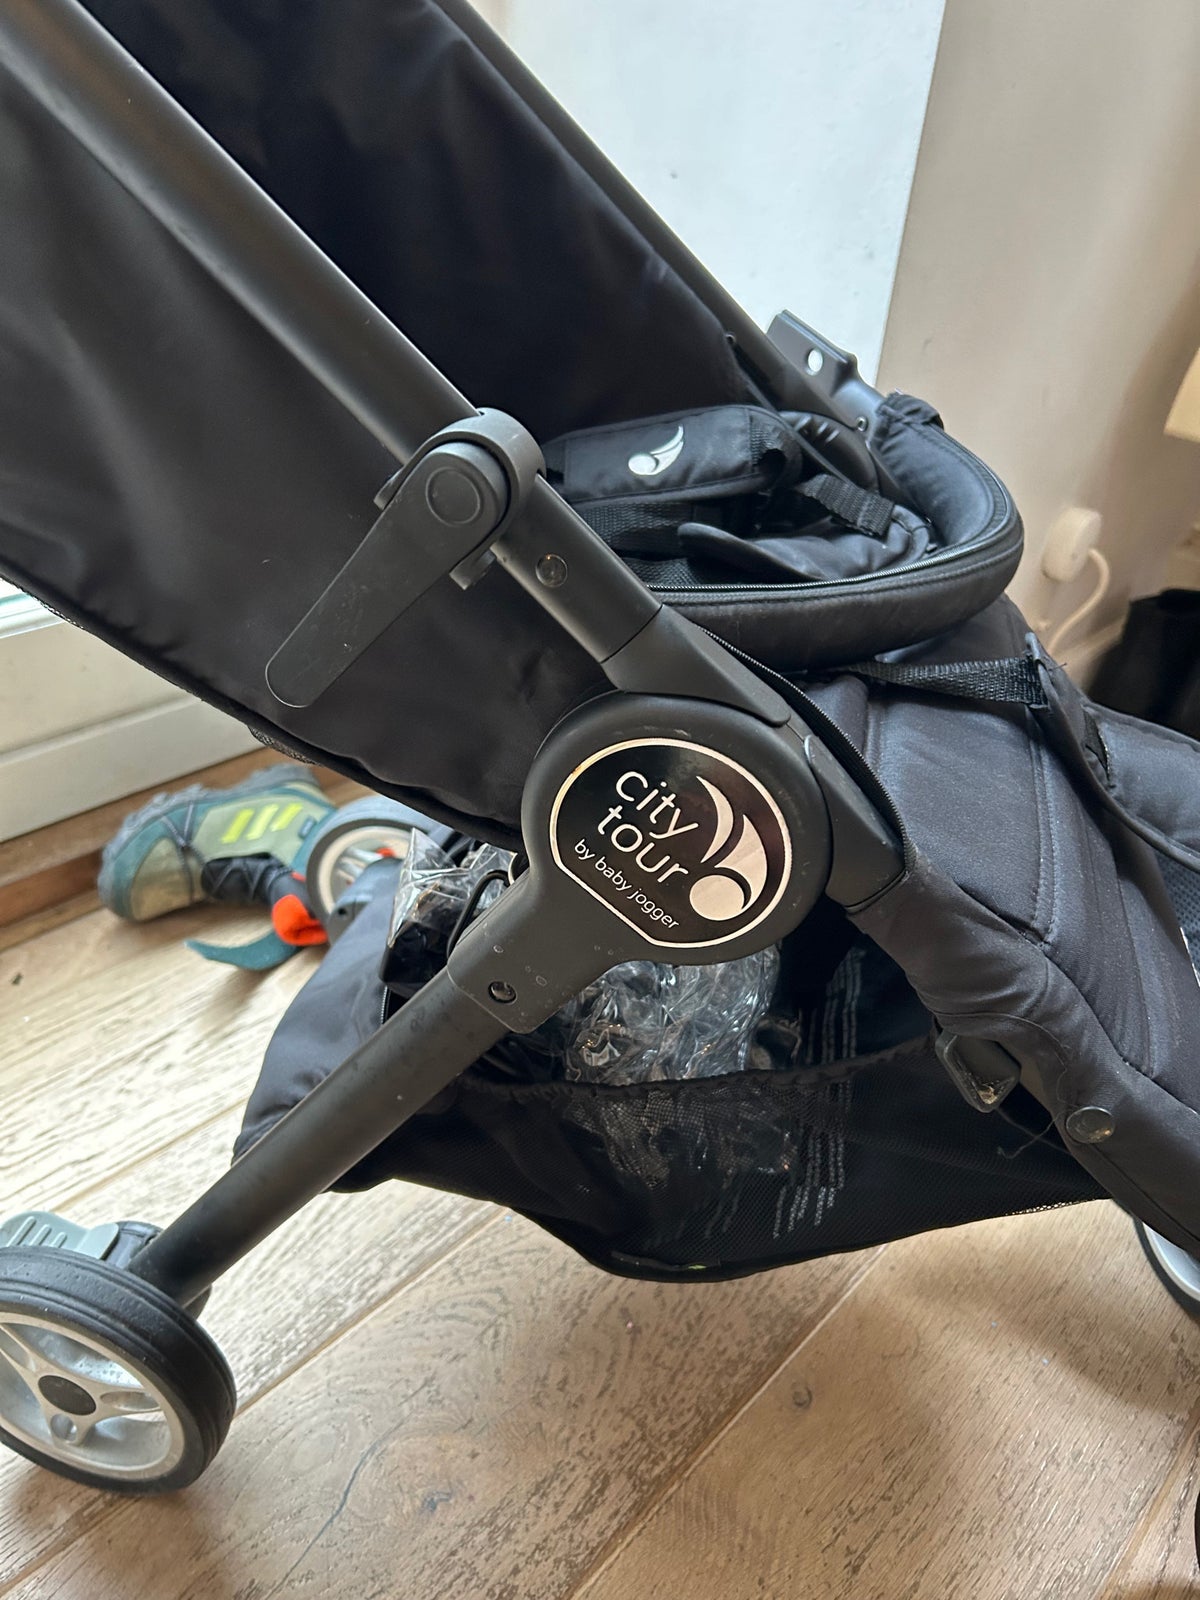 Babyjogger, Baby Jogger City tour by baby jogger